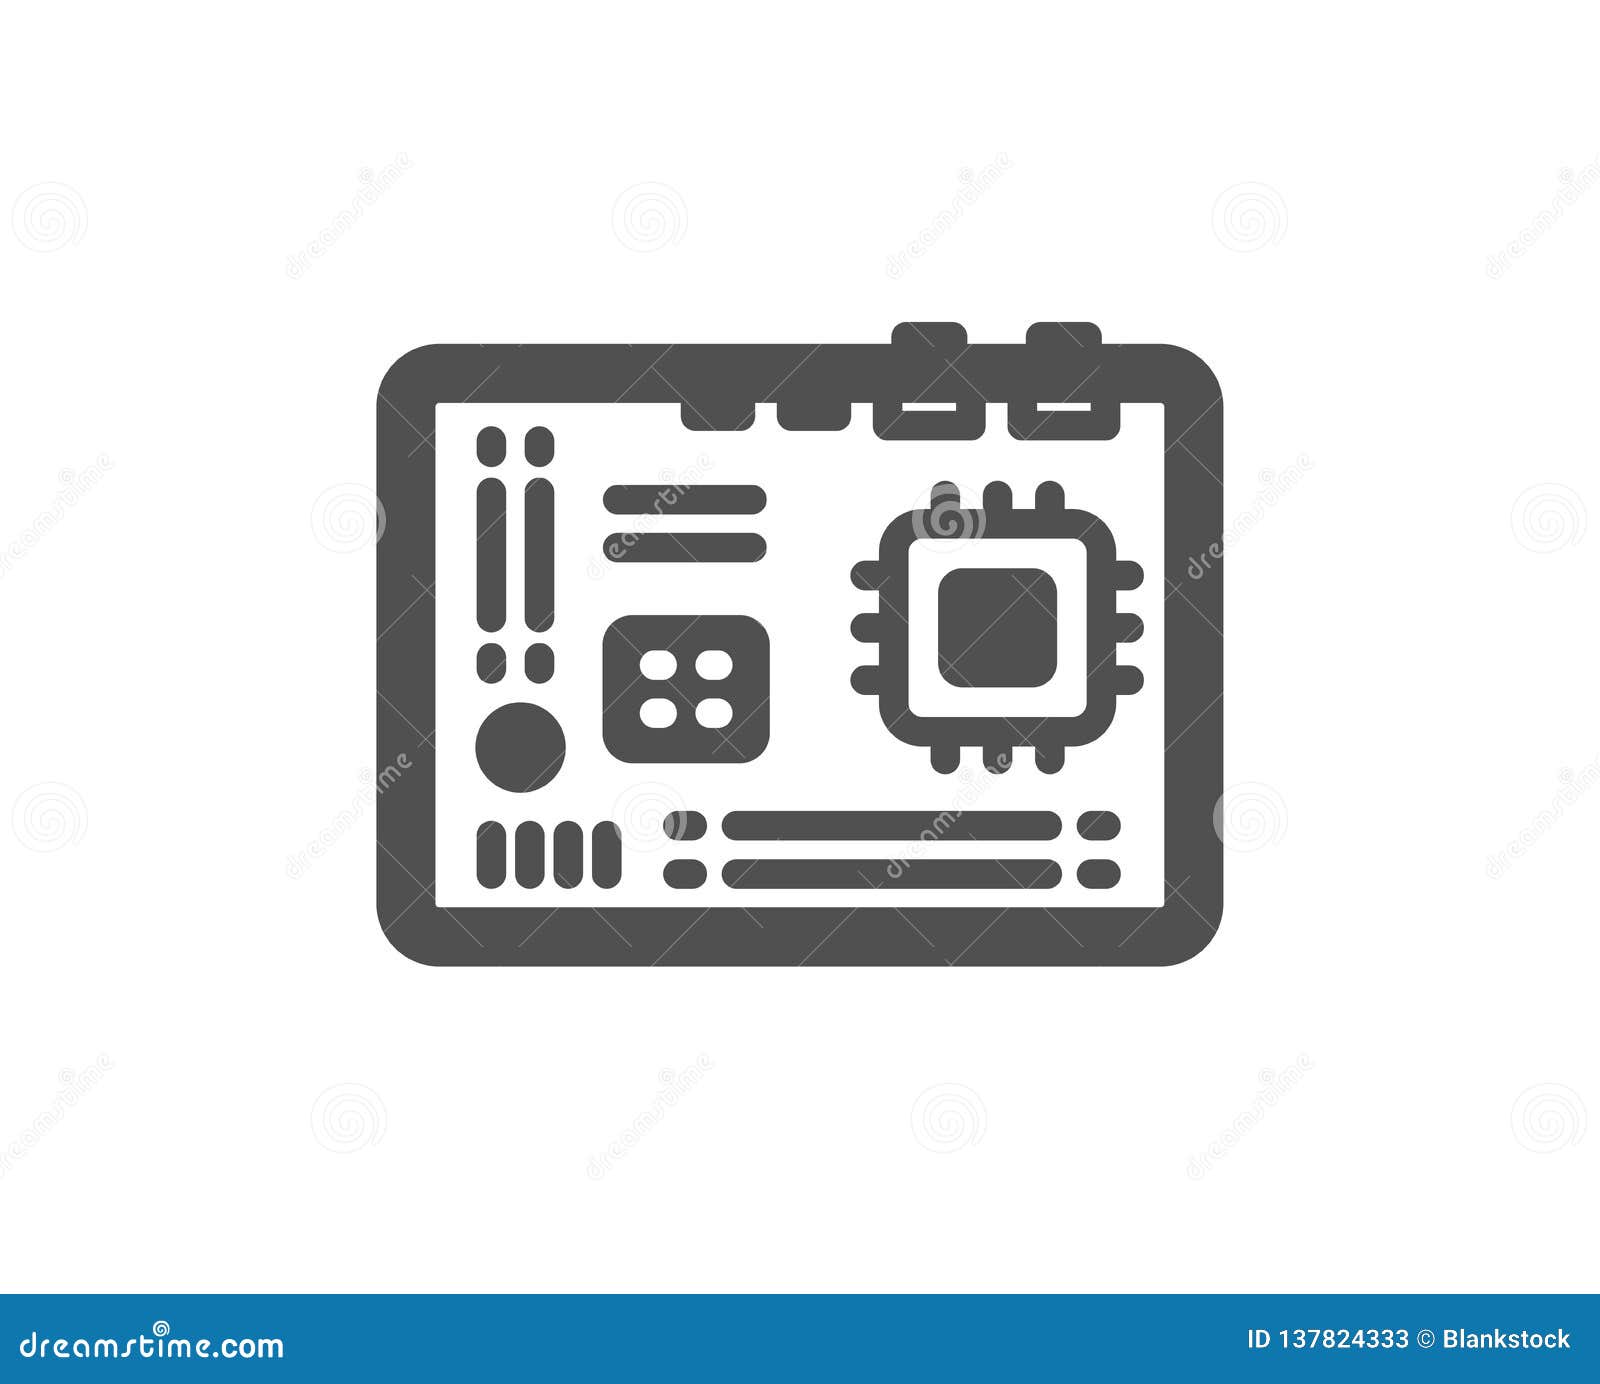 Download Motherboard Icon. Computer Component Hardware Sign. Vector ...